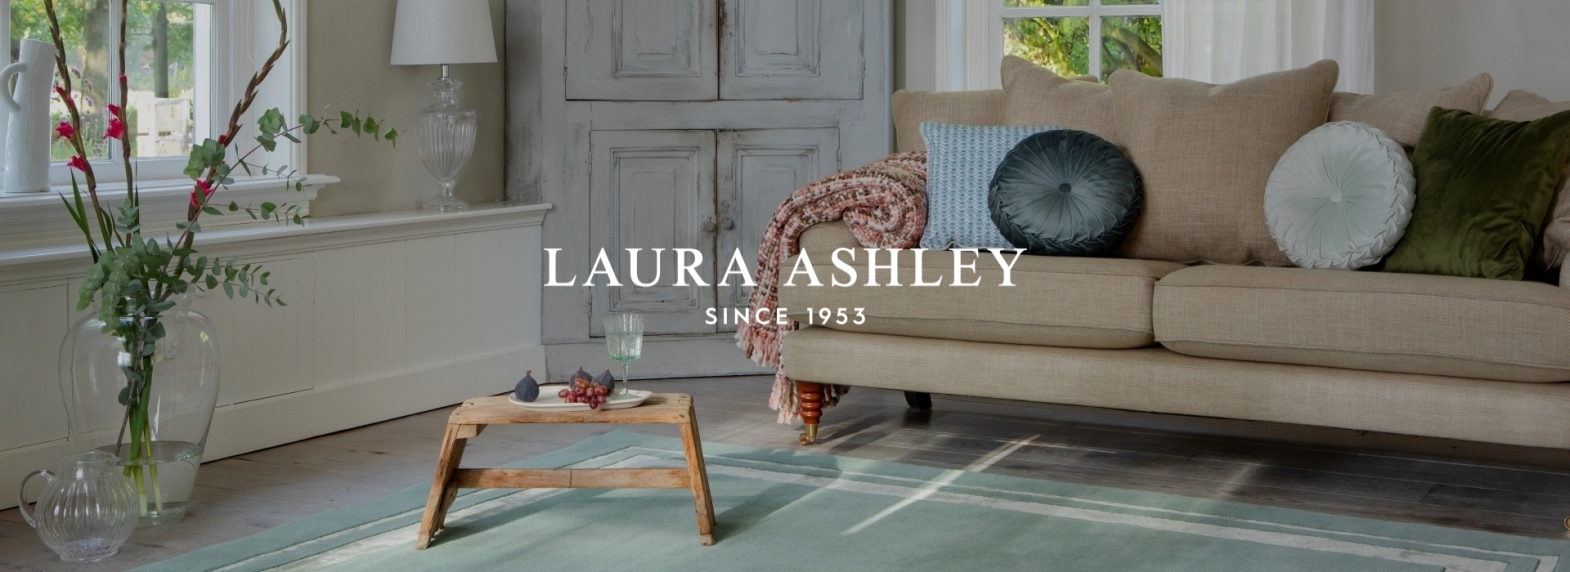 Laura Ashley Rugs & Lighting For Sale • Roomes Furniture & Interiors